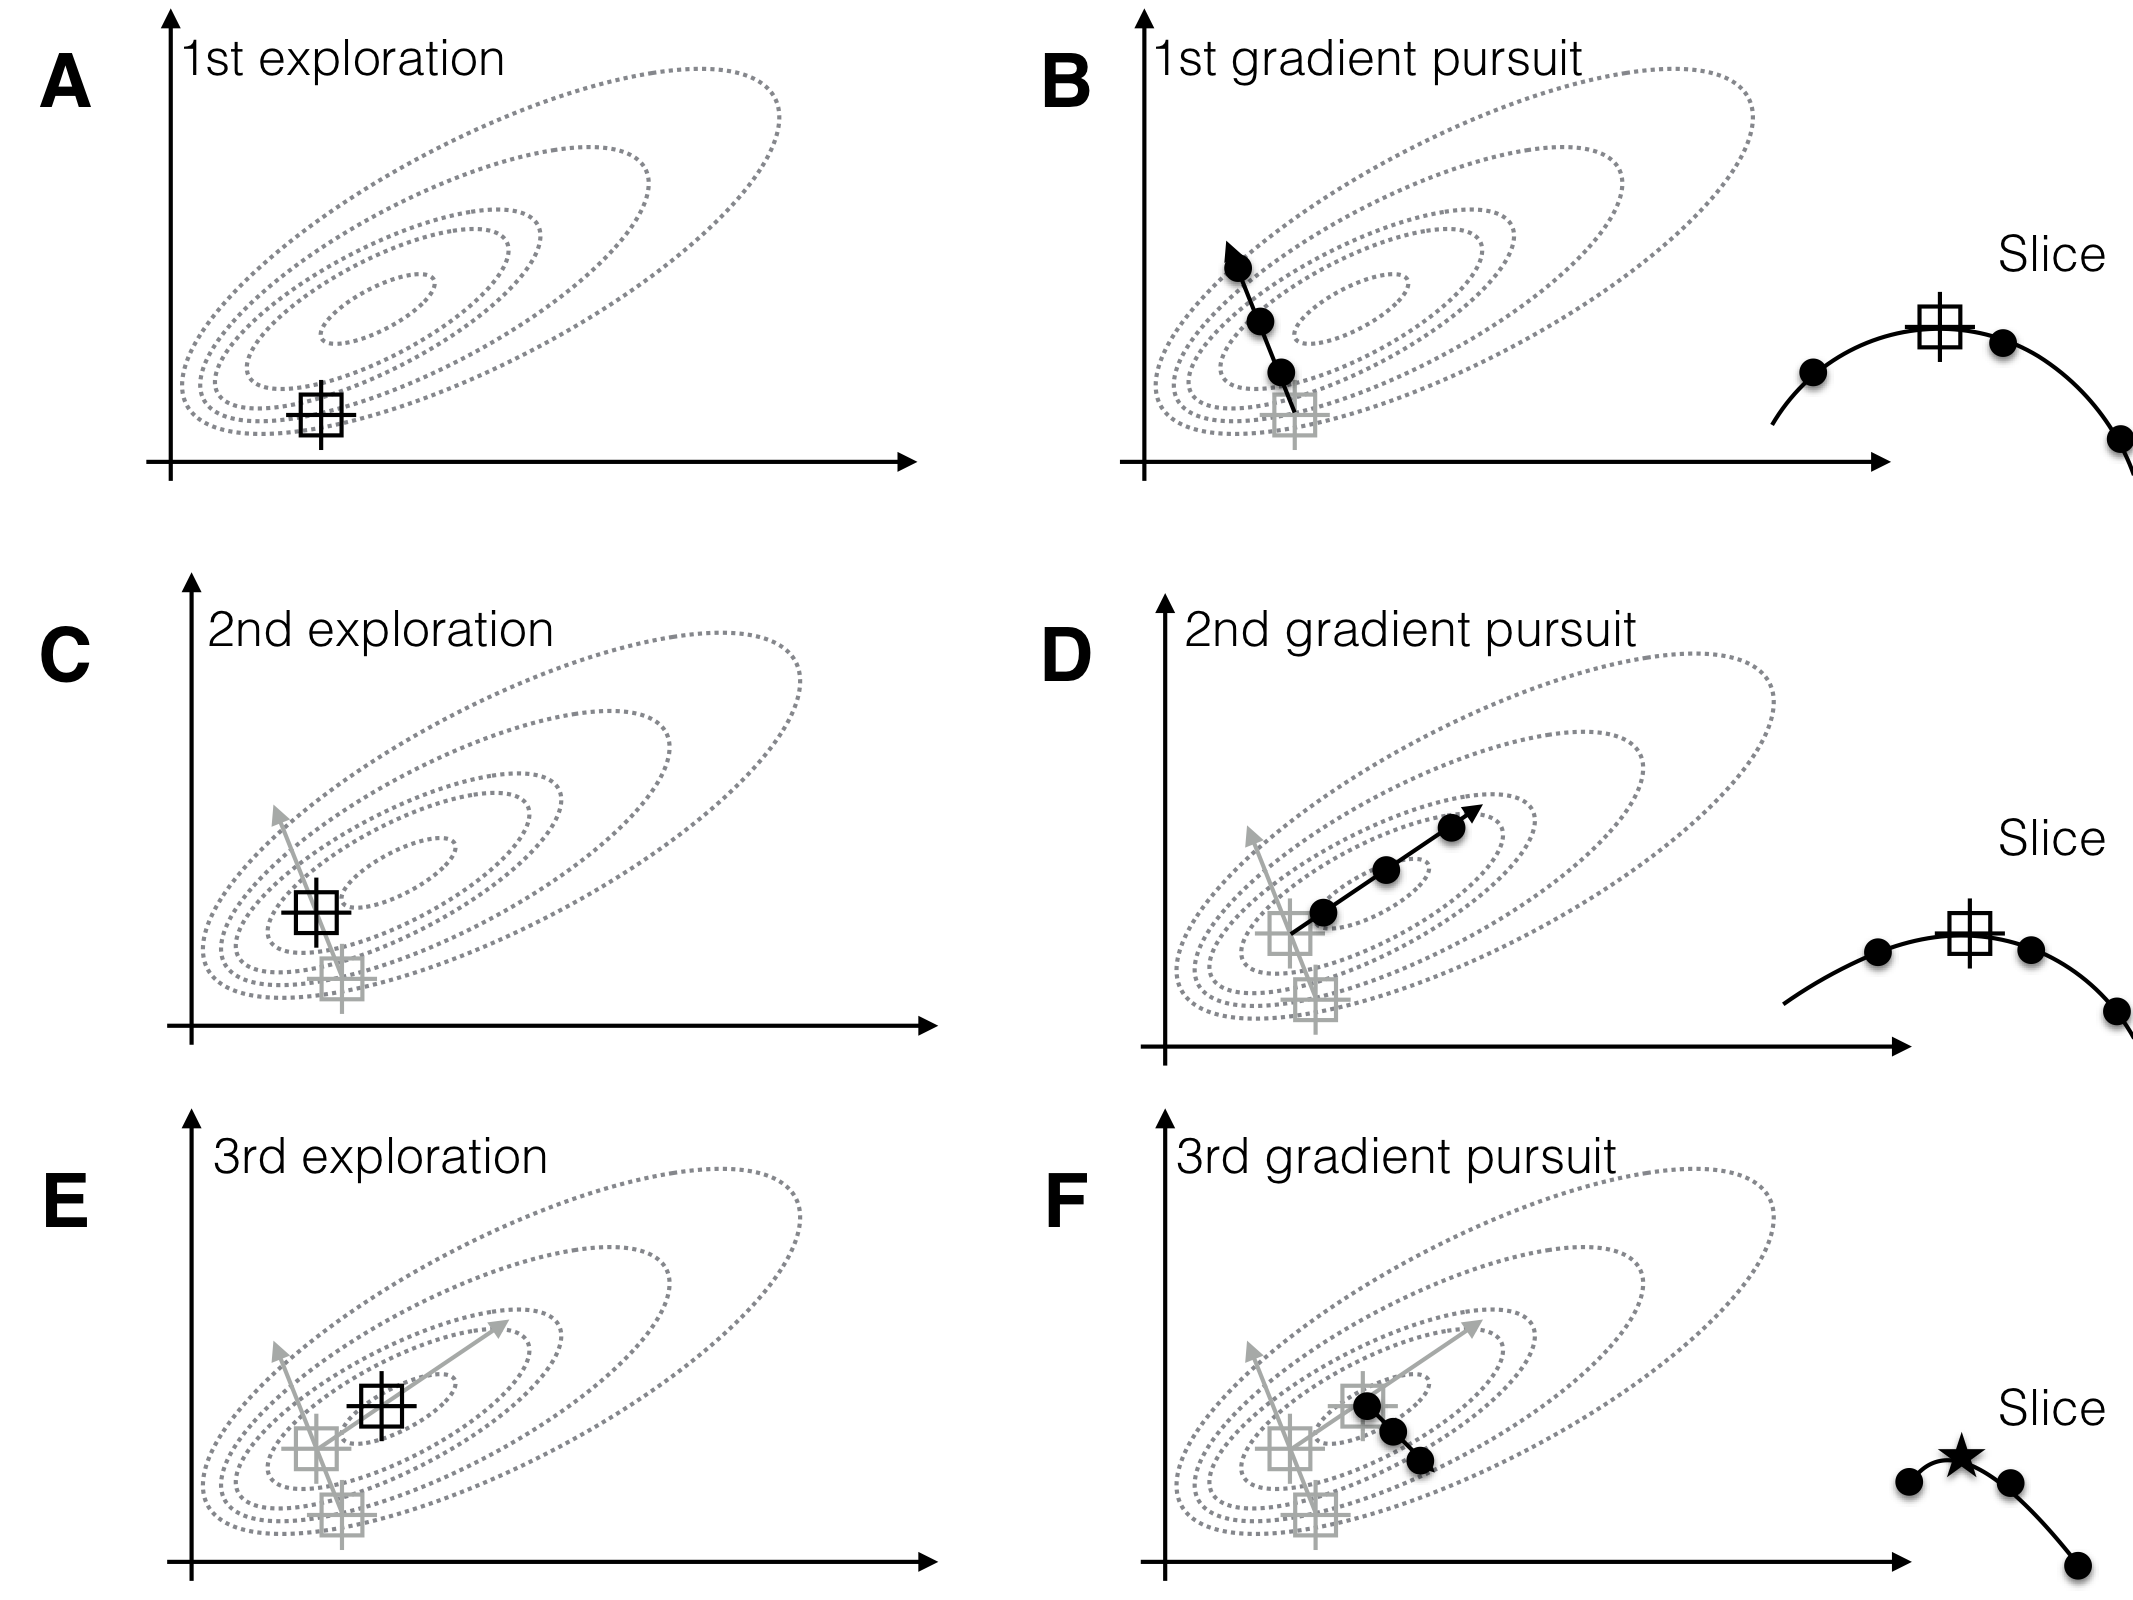 Sequential response surface experiments to determine optimum conditions. Three iterations of exploration (A,C,E) and gradient pursuit (B,D,F). Dotted lines: contours of response surface. Black lines and dots: region and points for exploring and gradient pursuit. Inlet curves in panels B,D,F show the slice along the gradient with measured points and resulting estimated maximum.